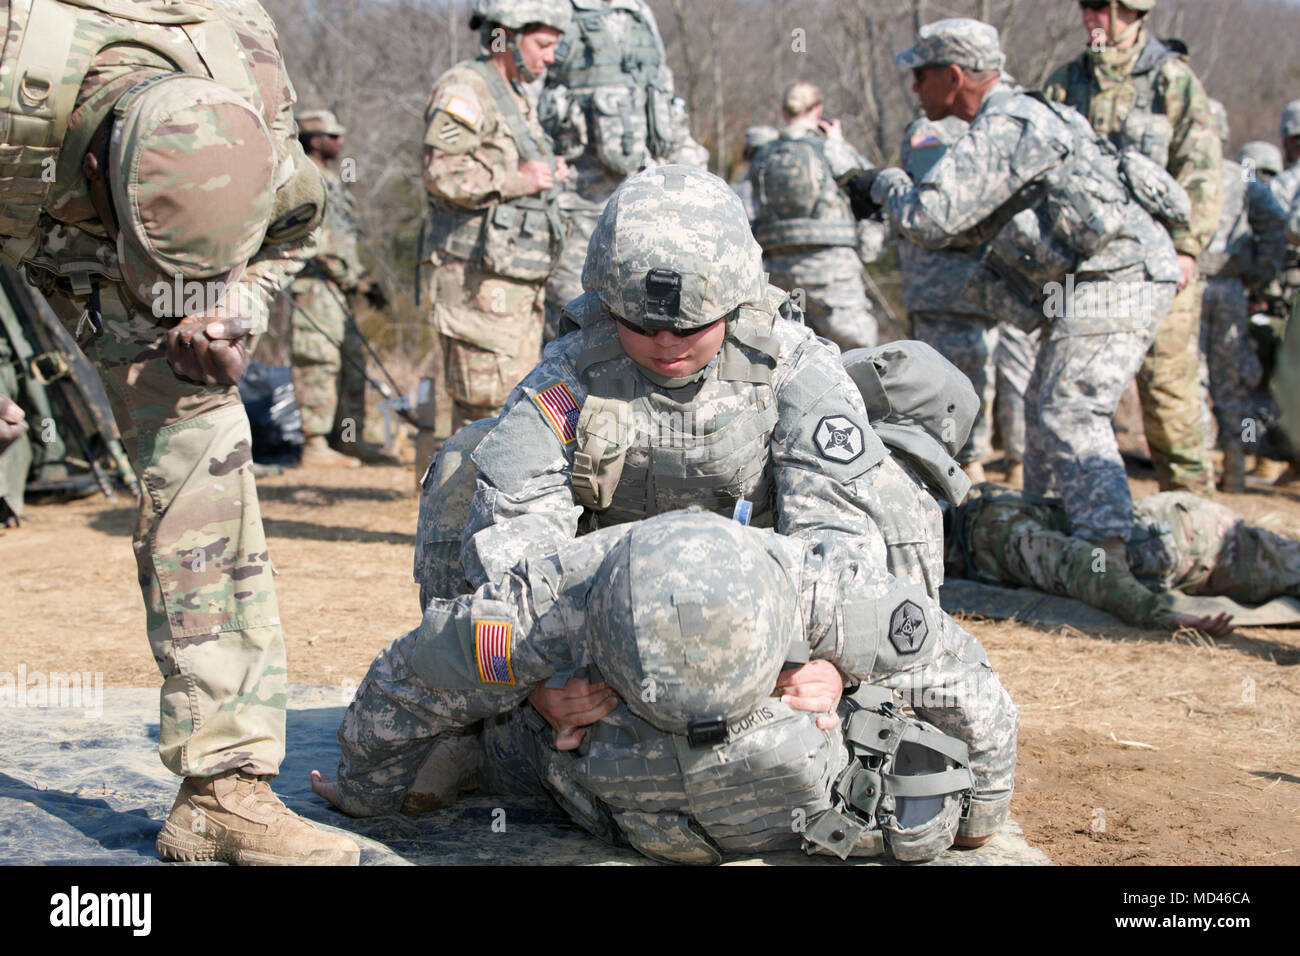 A U.S. Army Reserve Soldier performs a buddy carry on a simulated casualty during the Combat Support Training Exercise (CSTX) 78-18-03 at Fort Knox, Kentucky, March 15, 2018. CSTX 78-18-03 is a training exercise that ensures America's Army Reserve units and Soldiers are trained and ready to deploy on short-notice and bring capable, combat-ready and lethal firepower in support of the Army and our joint partners anywhere in the world. (U.S. Army Reserve photo by Spc. Torrance Saunders) Stock Photo